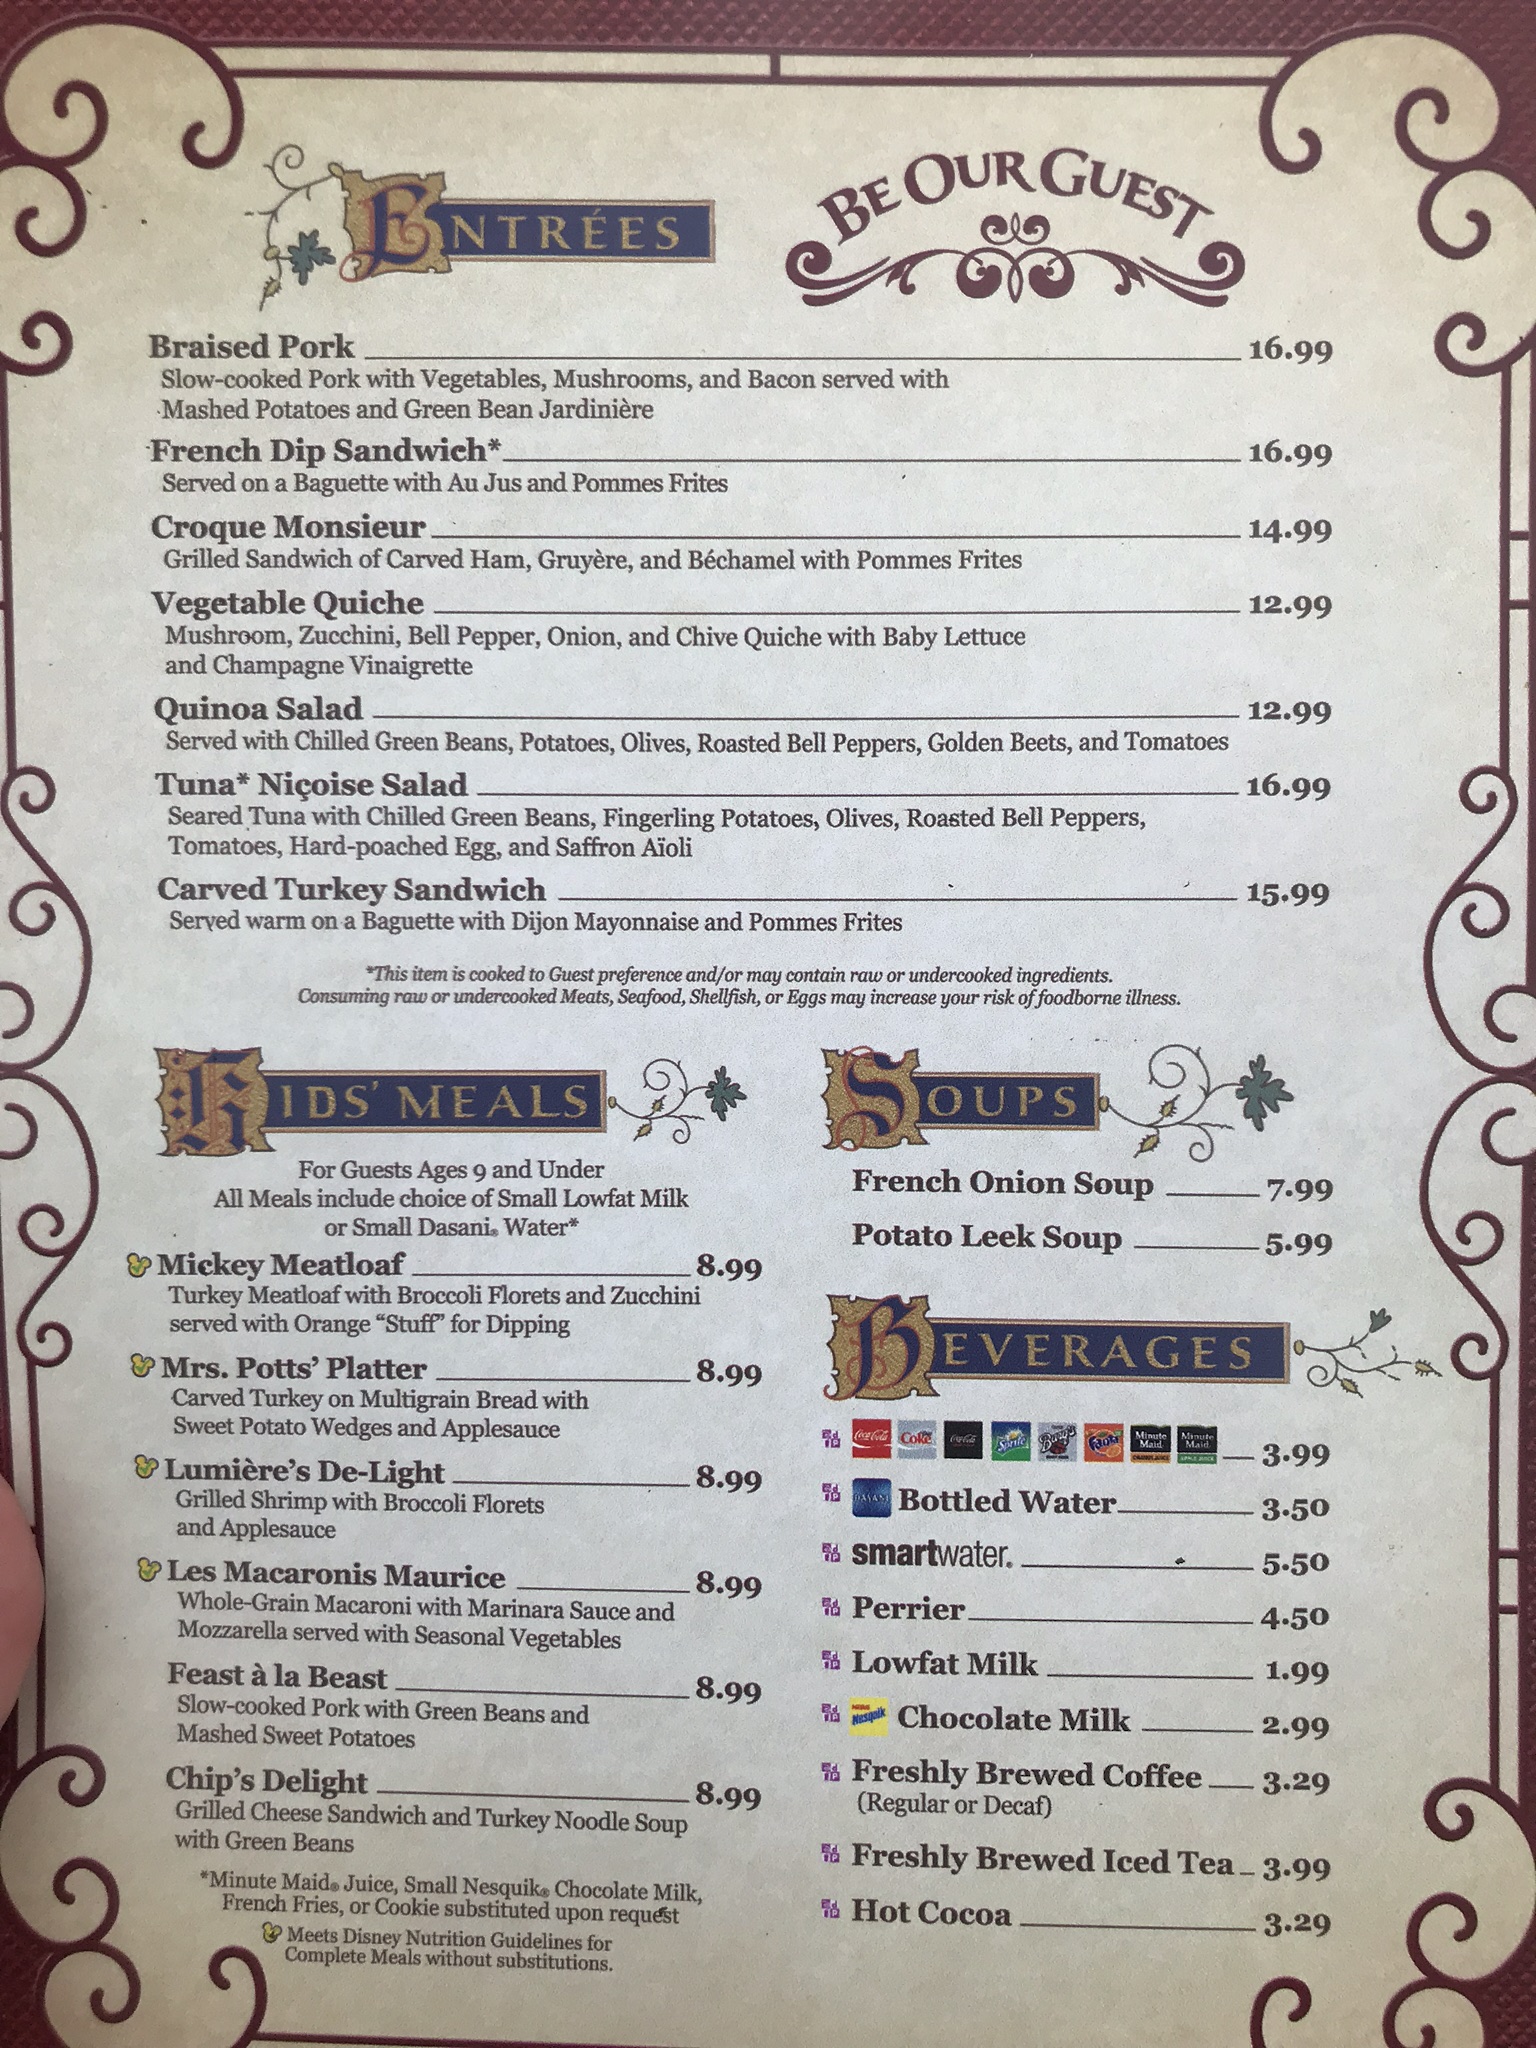 be our guest restaurant menu sign